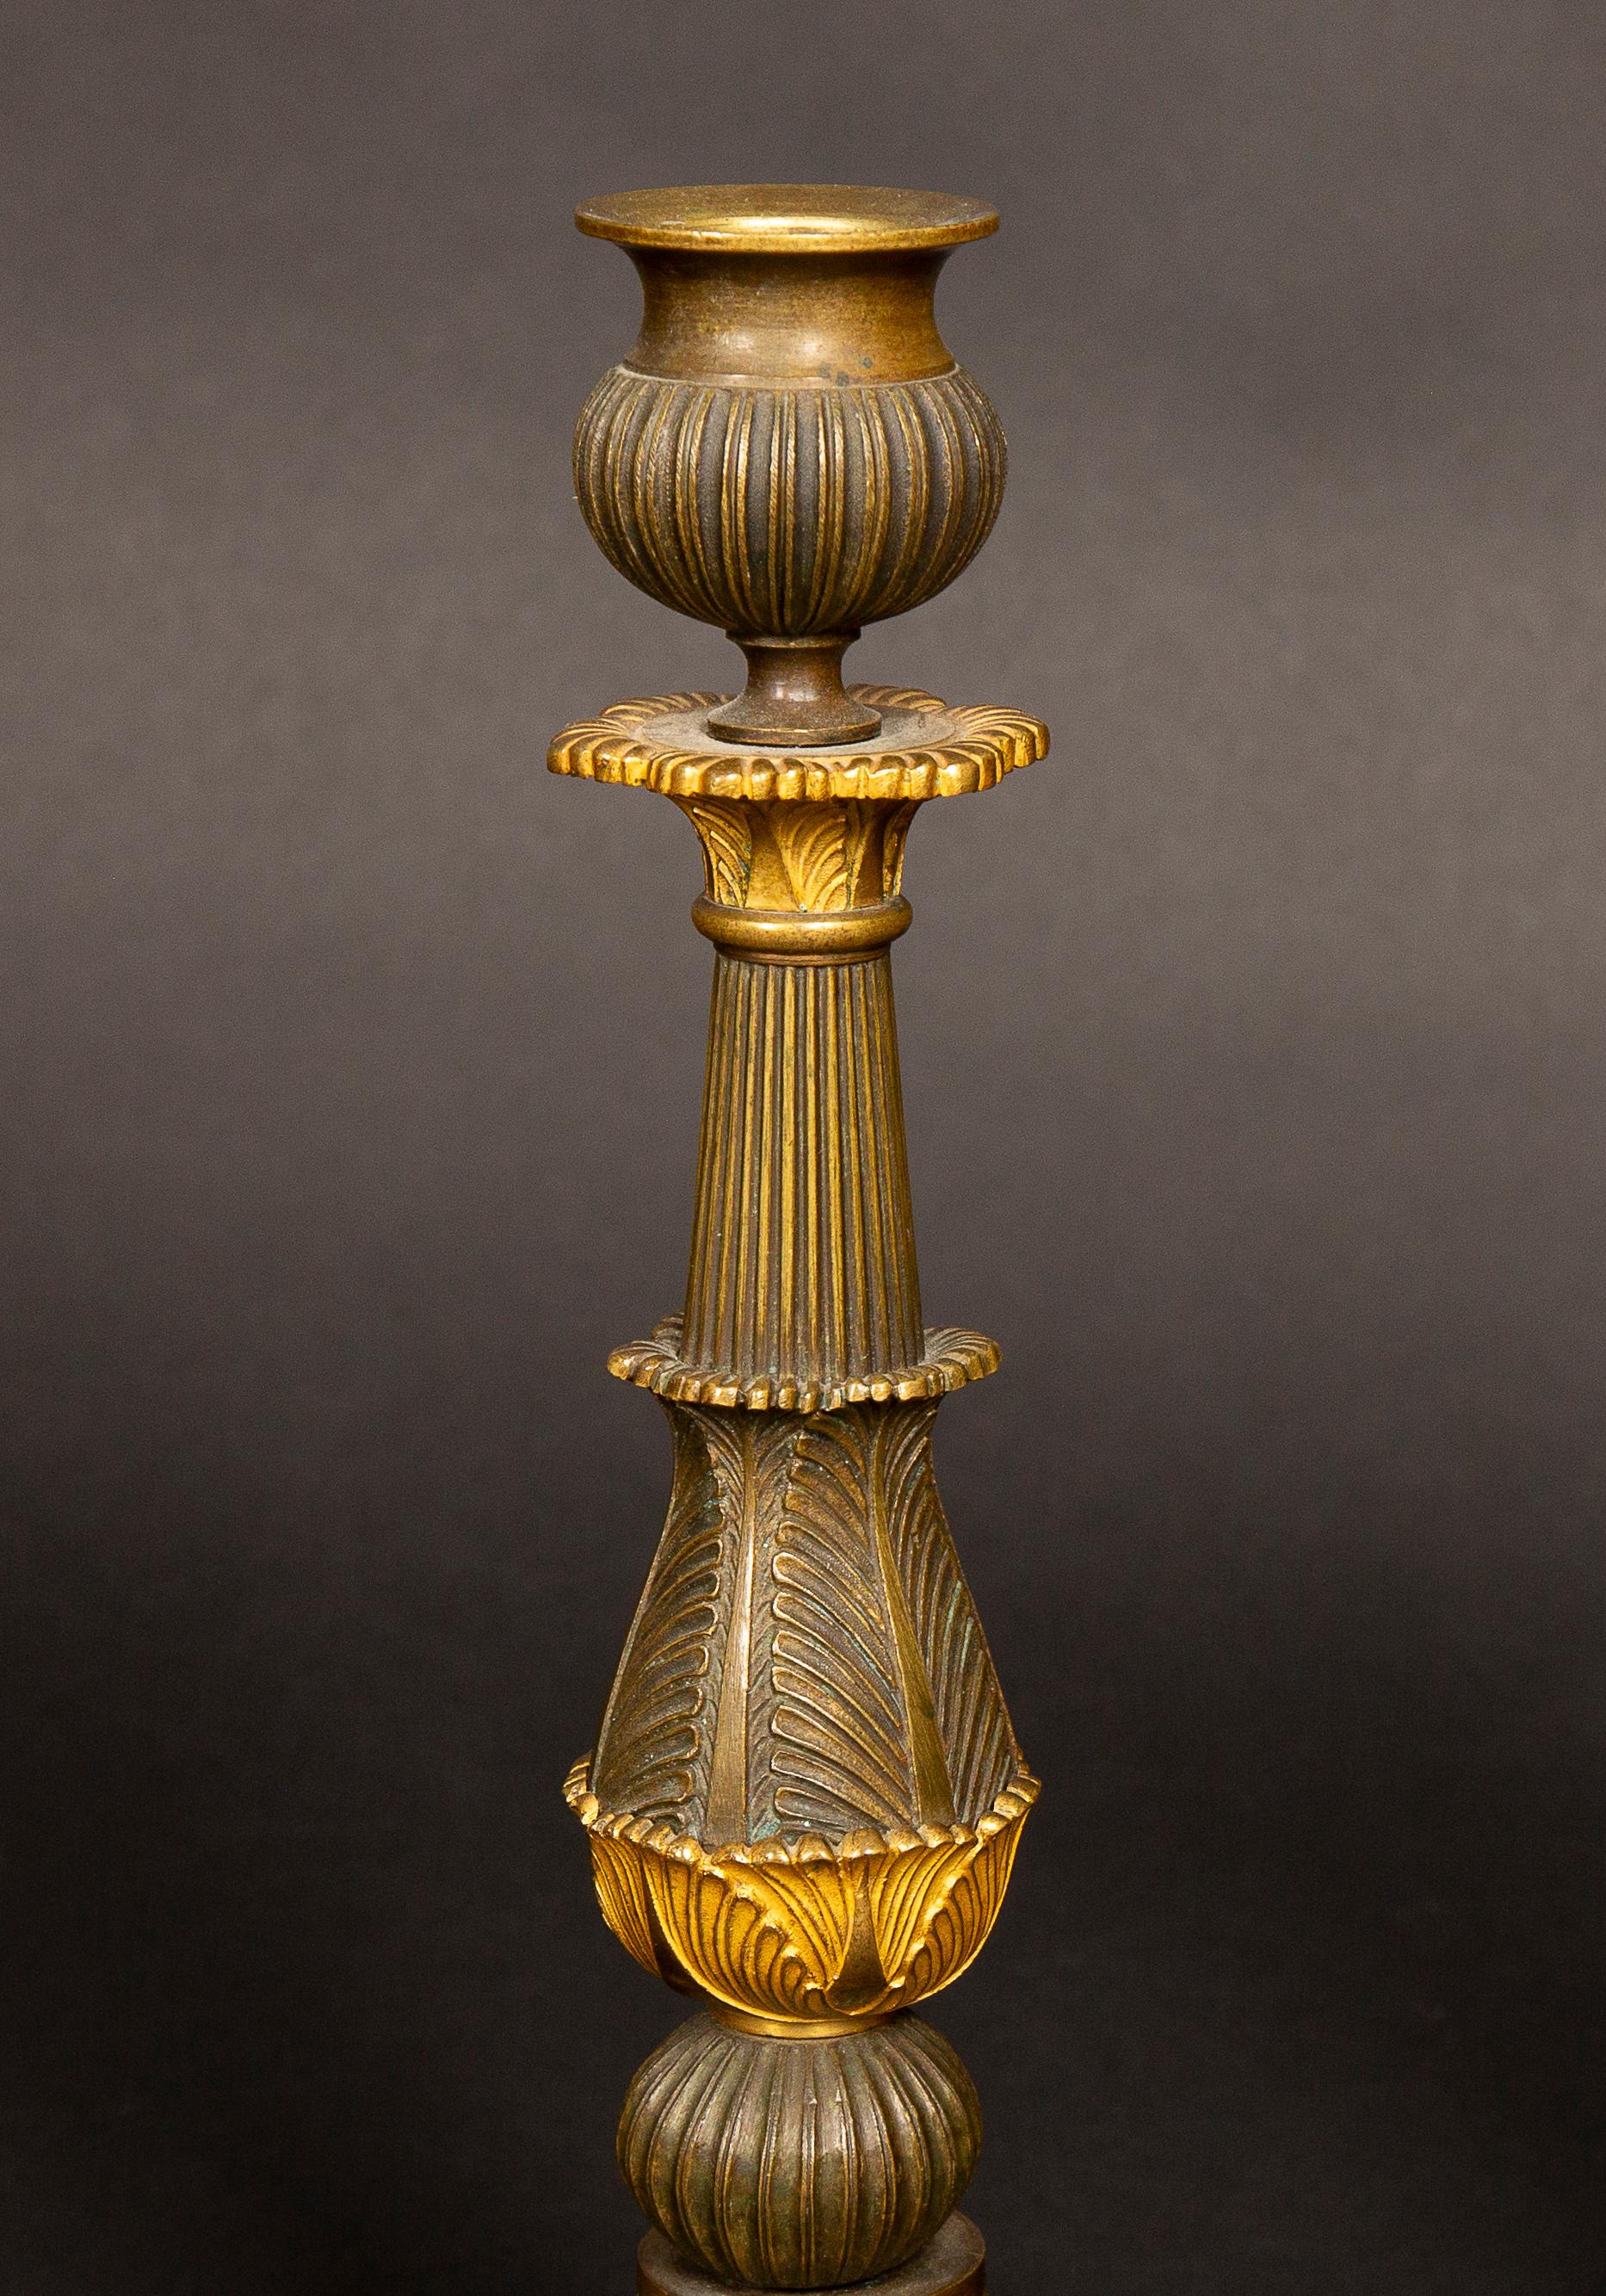 Bronze Pair of French Palmette Design Candle Sticks from the 19th Century